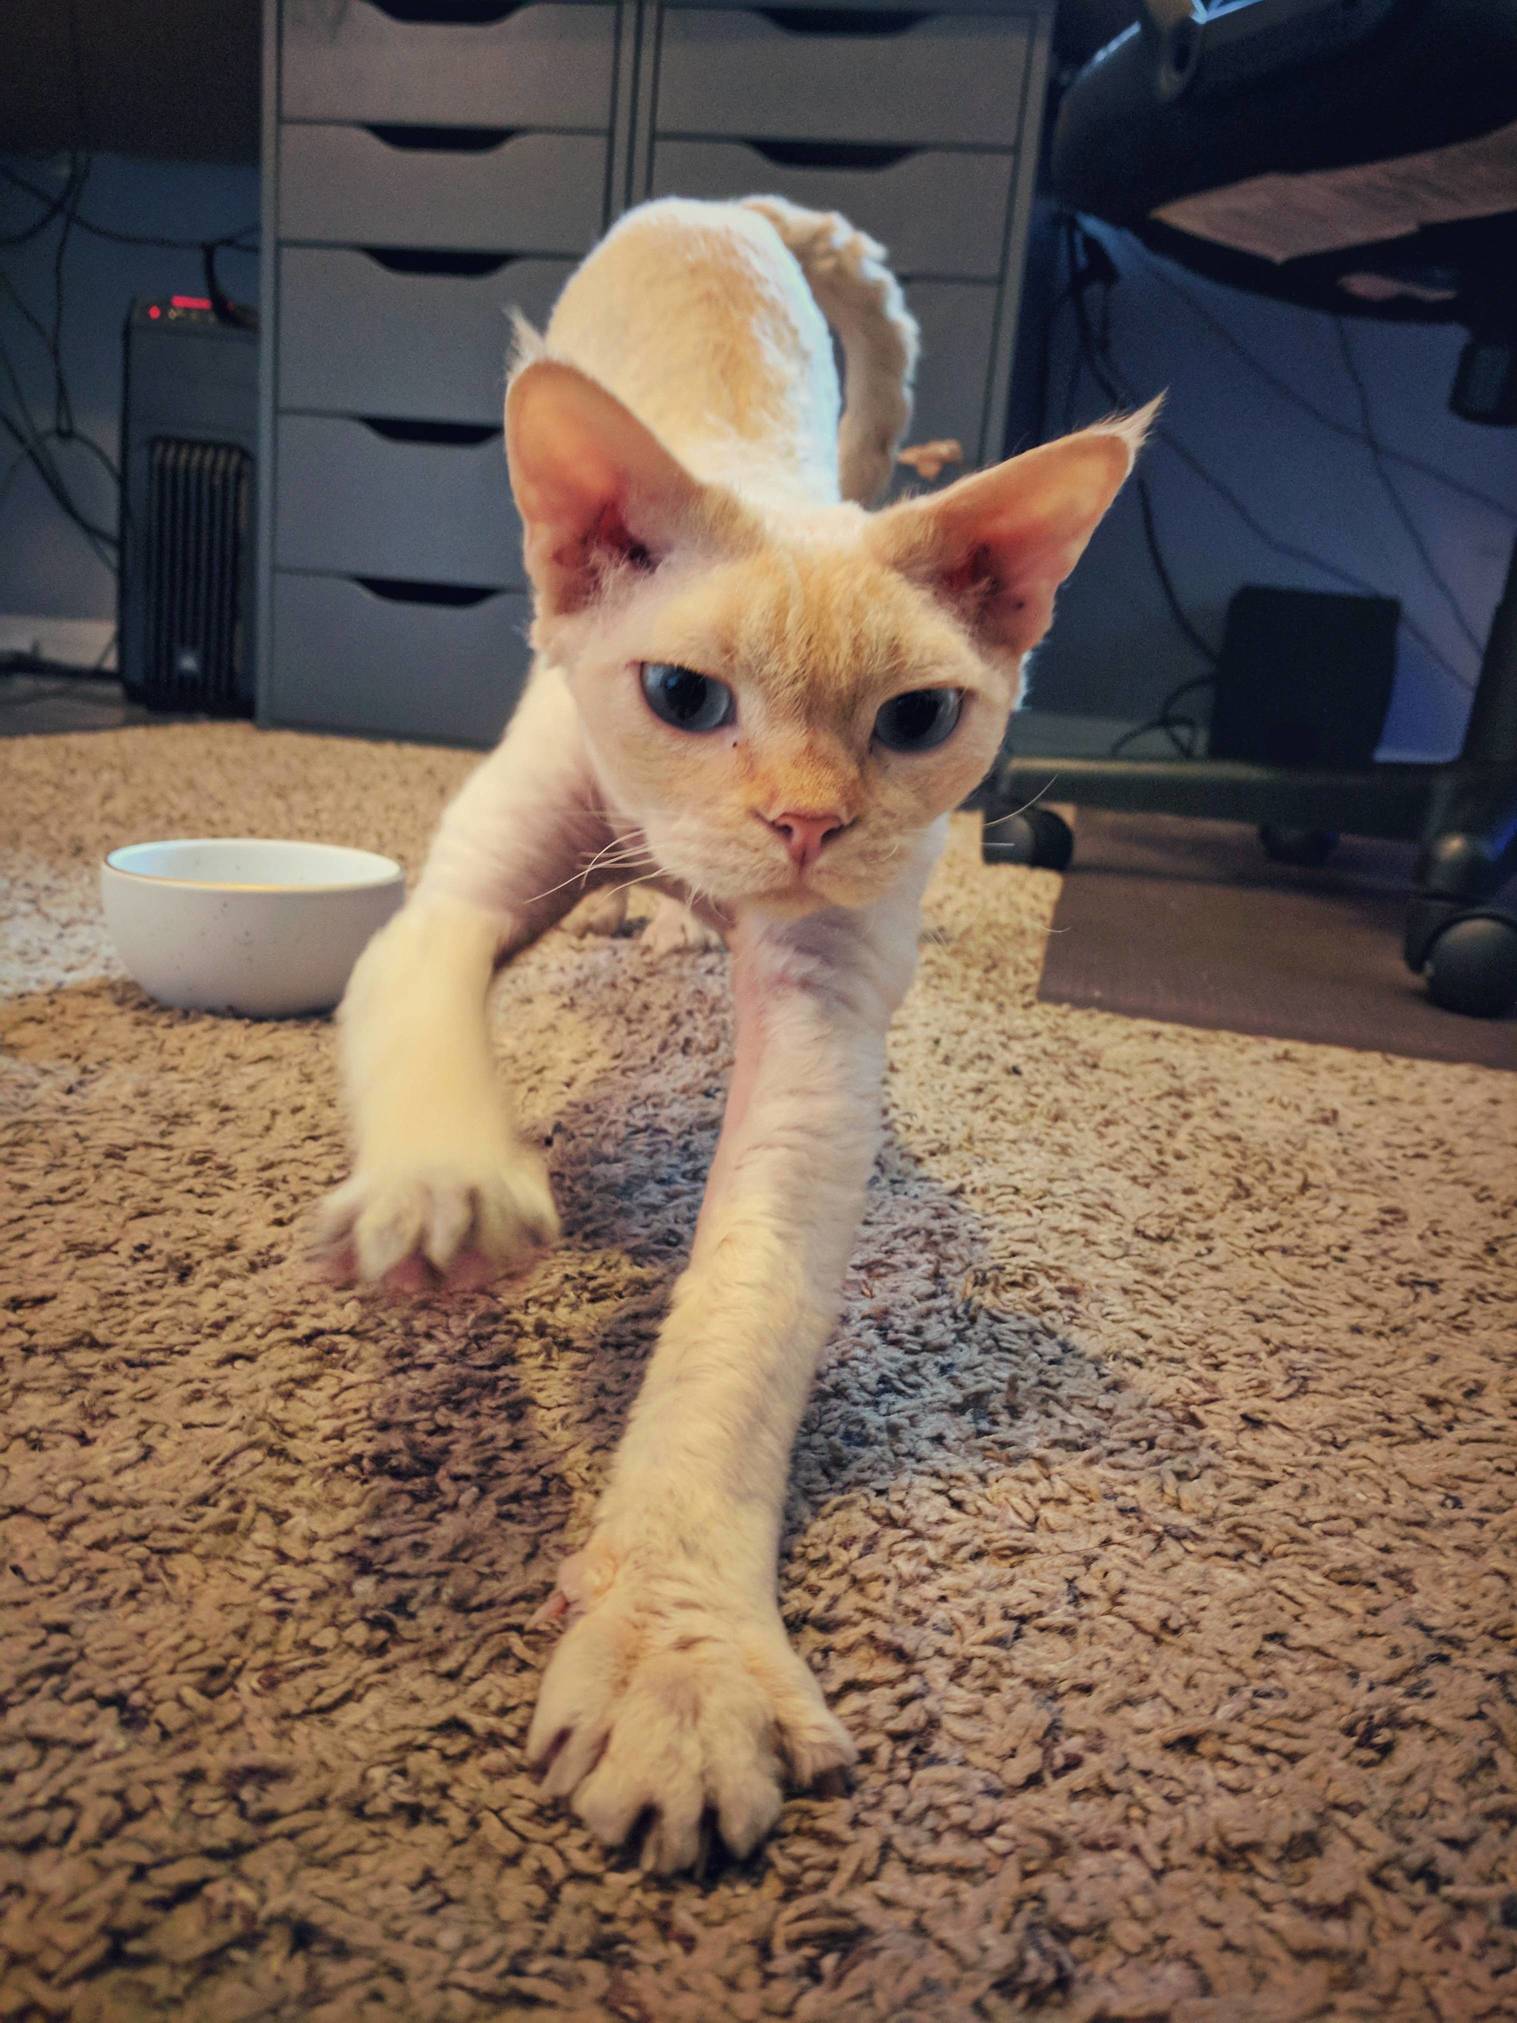 He takes his morning stretch very seriously